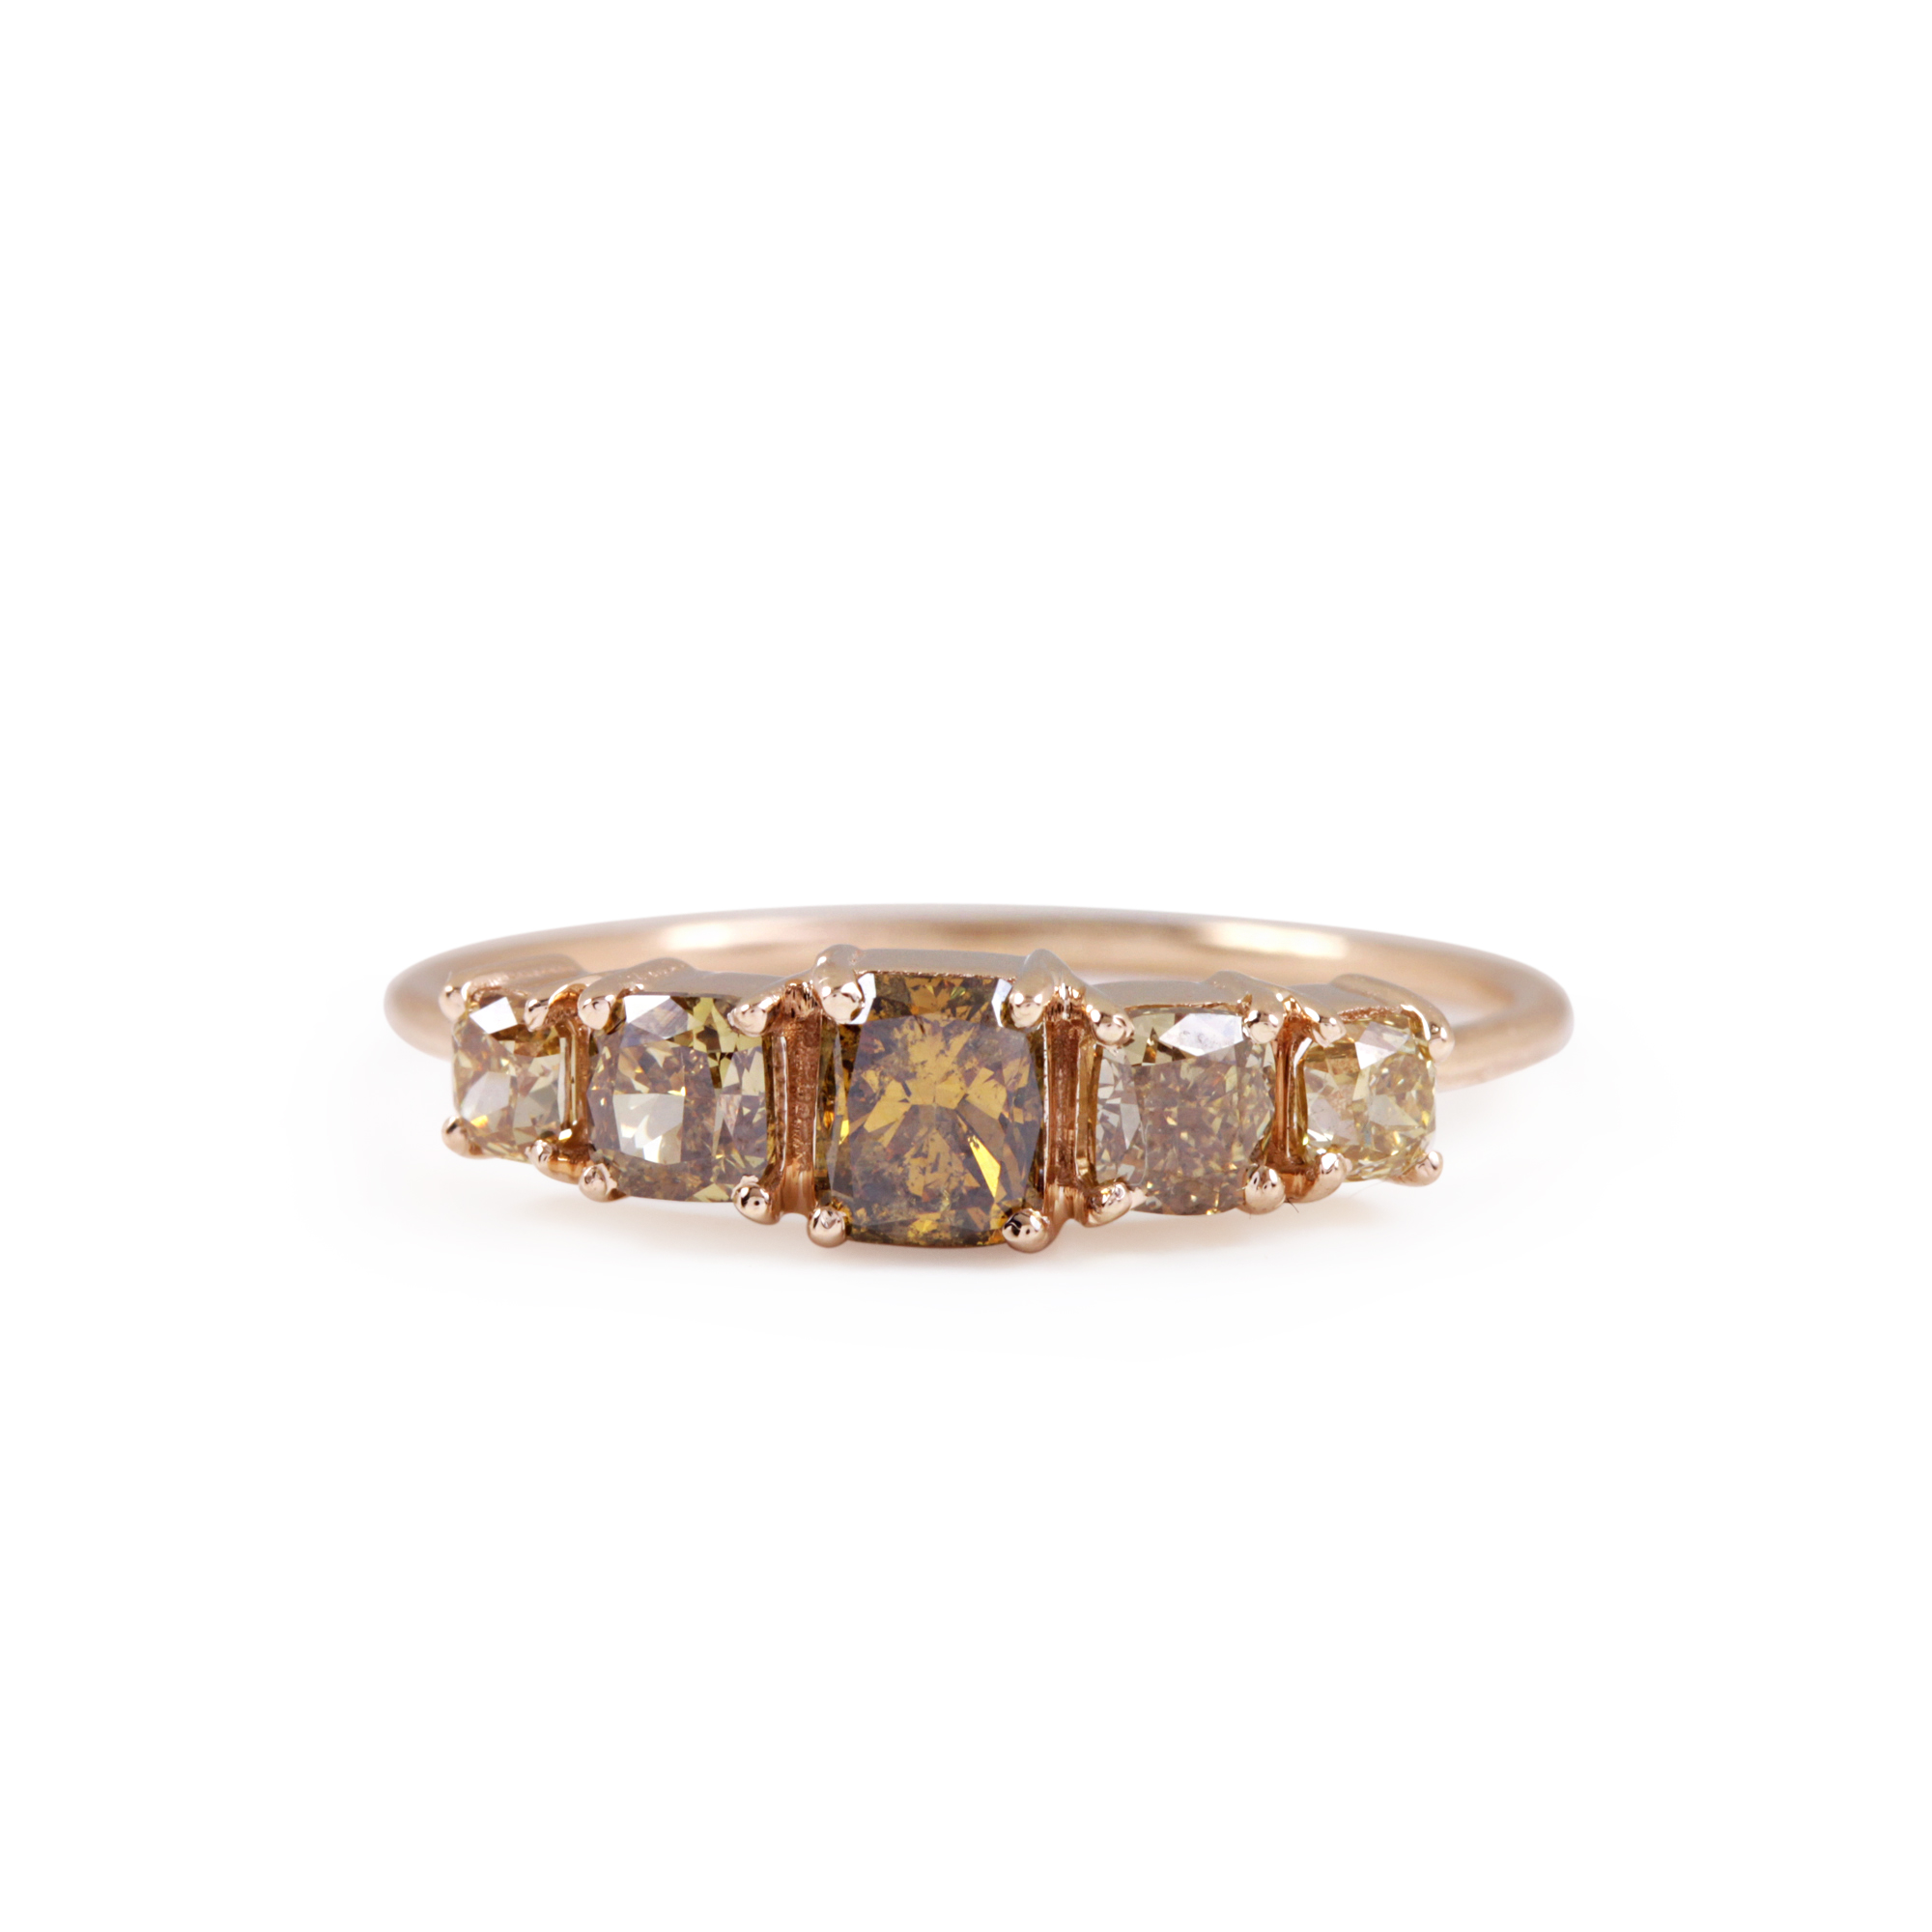 14K Solid Yellow Gold Natural Pave Diamond Ring Jewelry